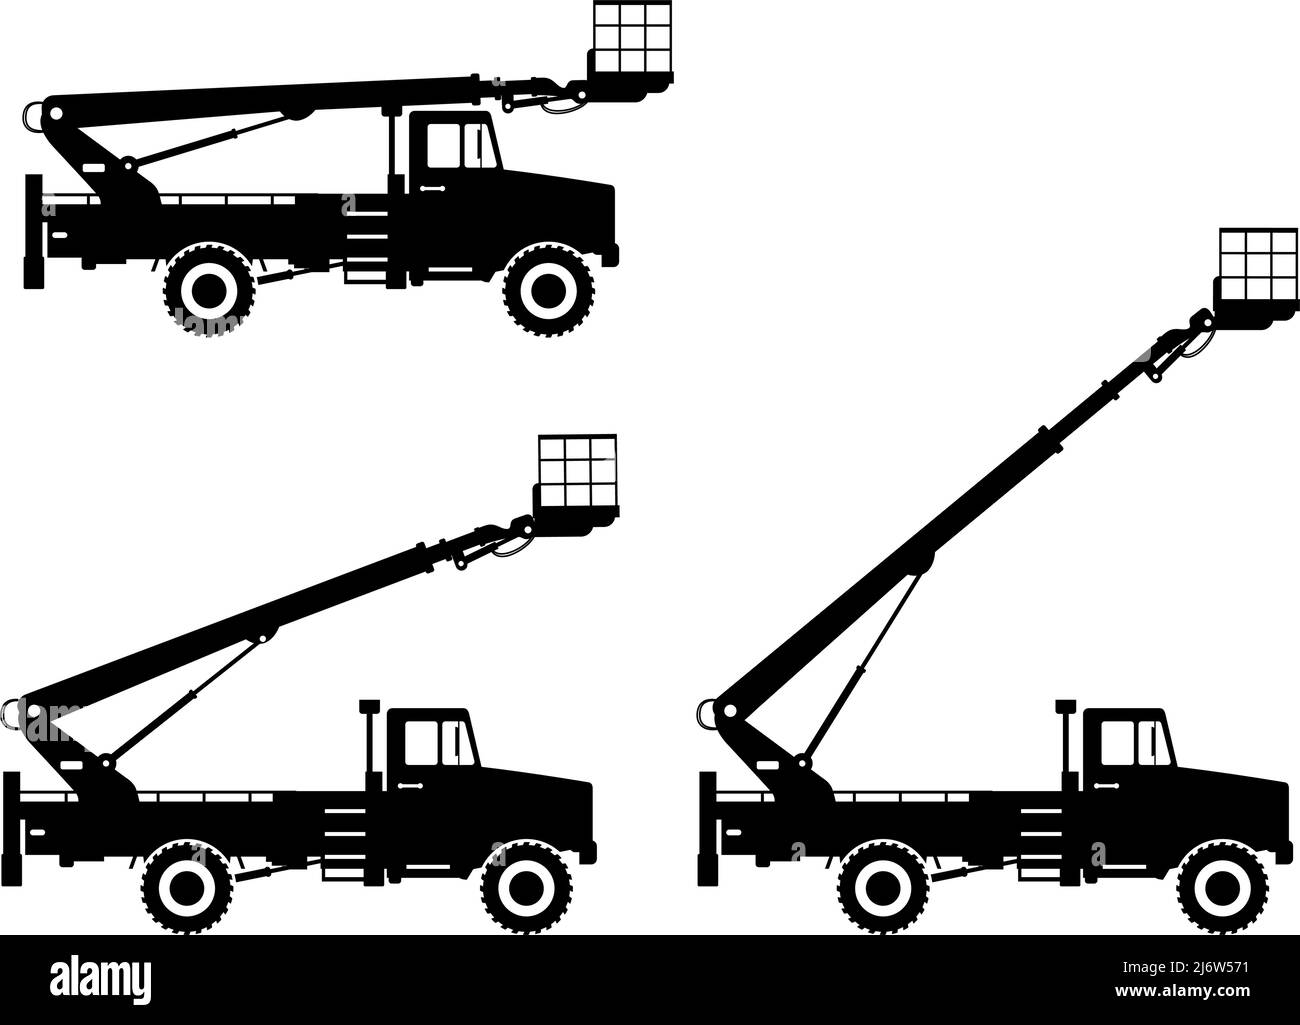 Silhouette of aerial platform truck with different boom position. Heavy construction machine. Heavy equipment and machinery. Vector illustration. Stock Vector